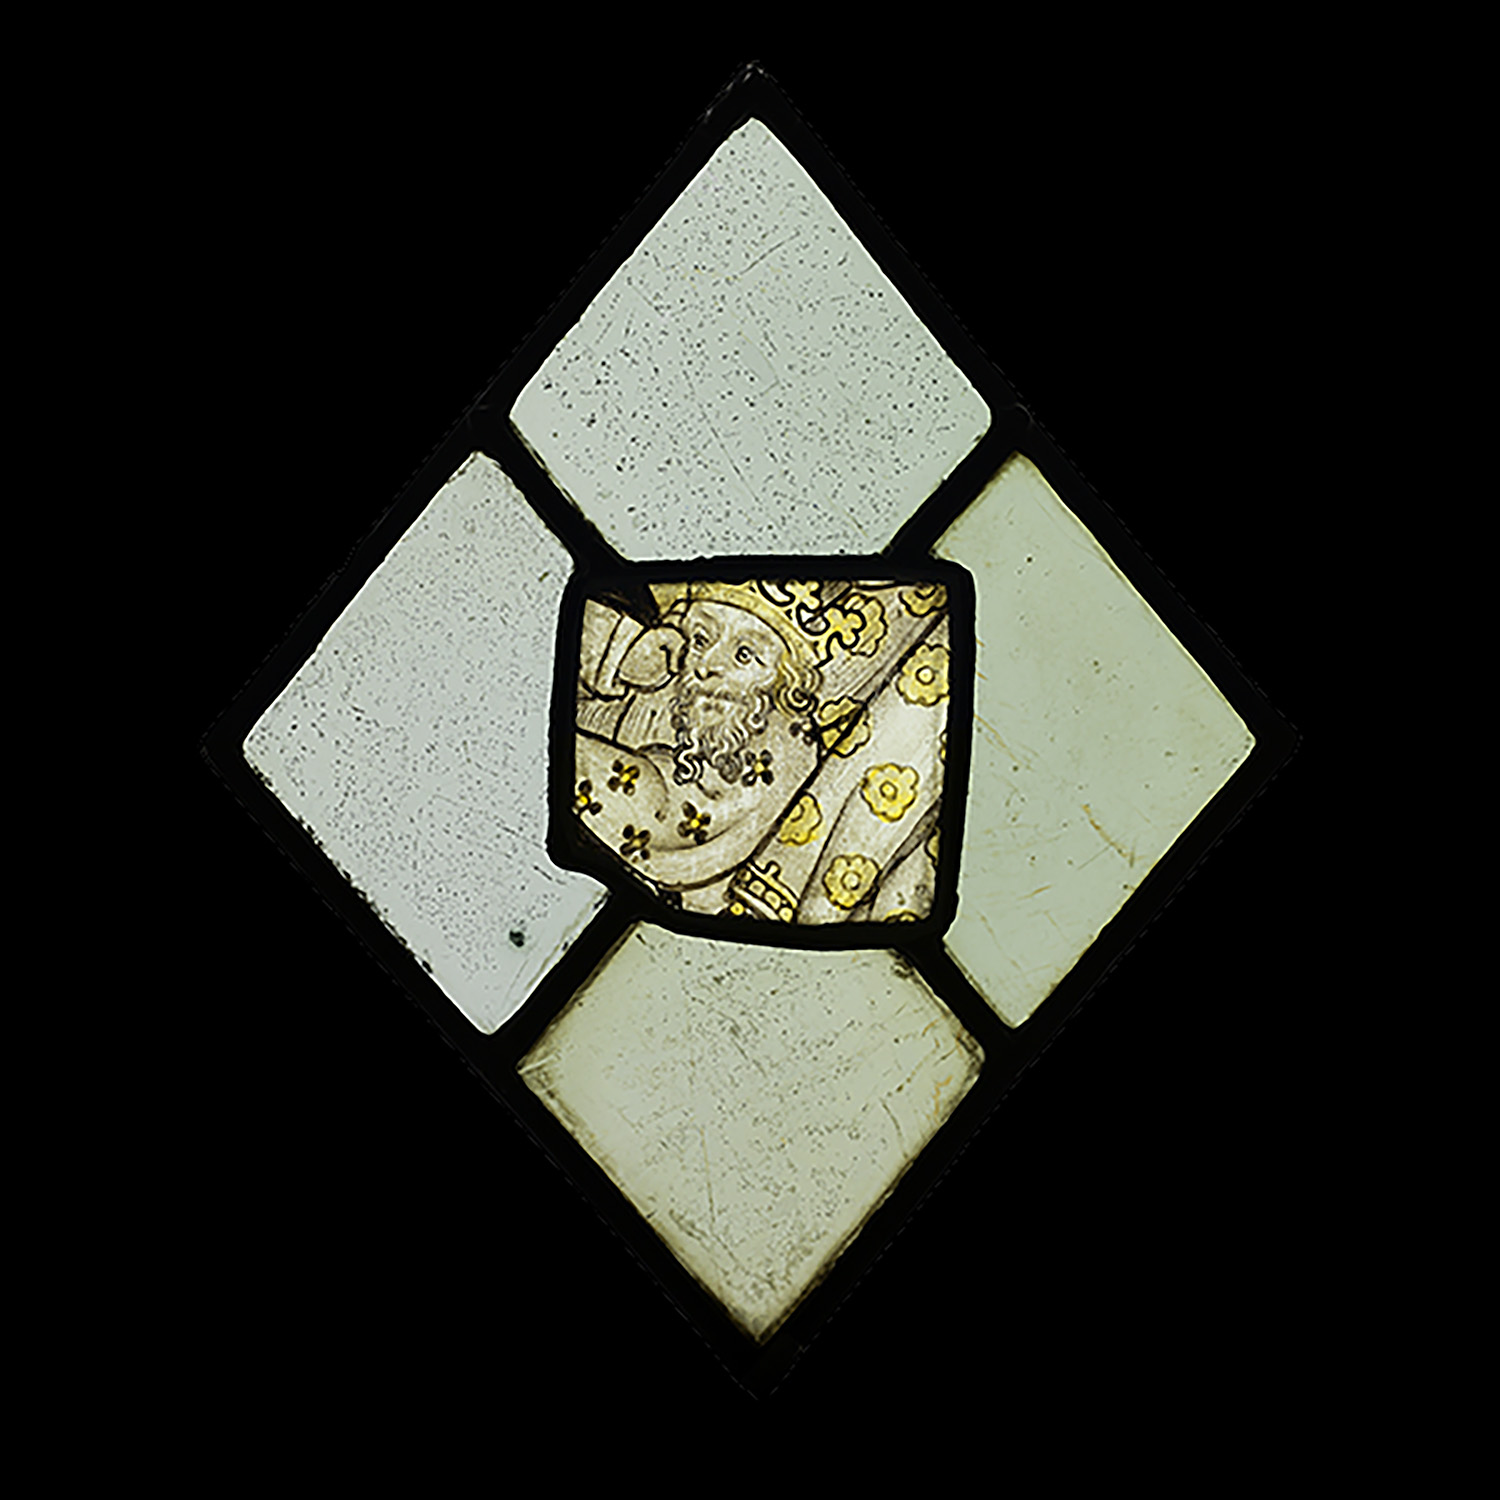 Glass Fragment with King Maxentius